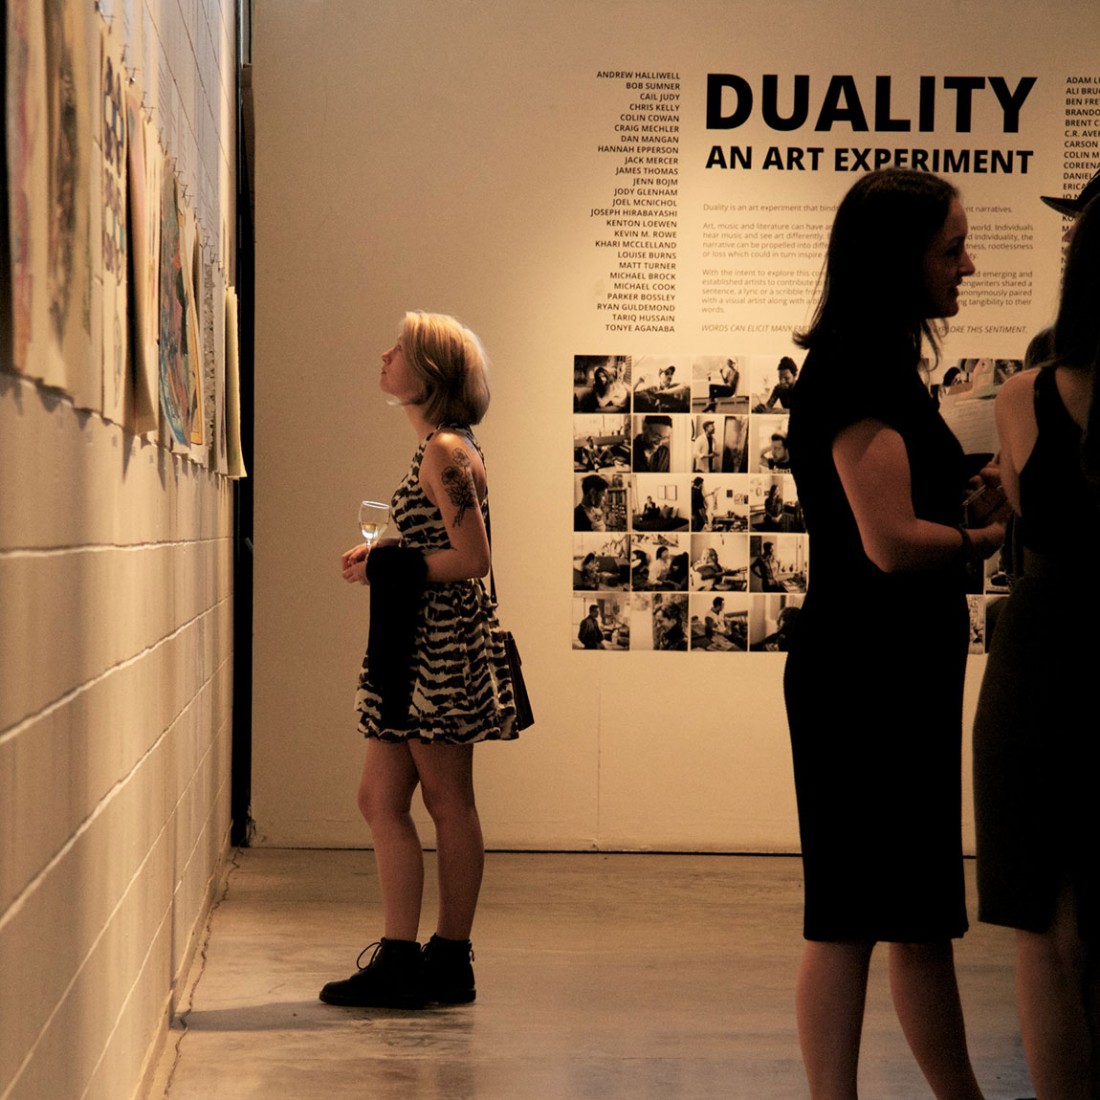 Duality: An Art Experiment at East Van Studios, Vancouver BC, 2014. Photo by Ravi Gill for VANDOCUMENT